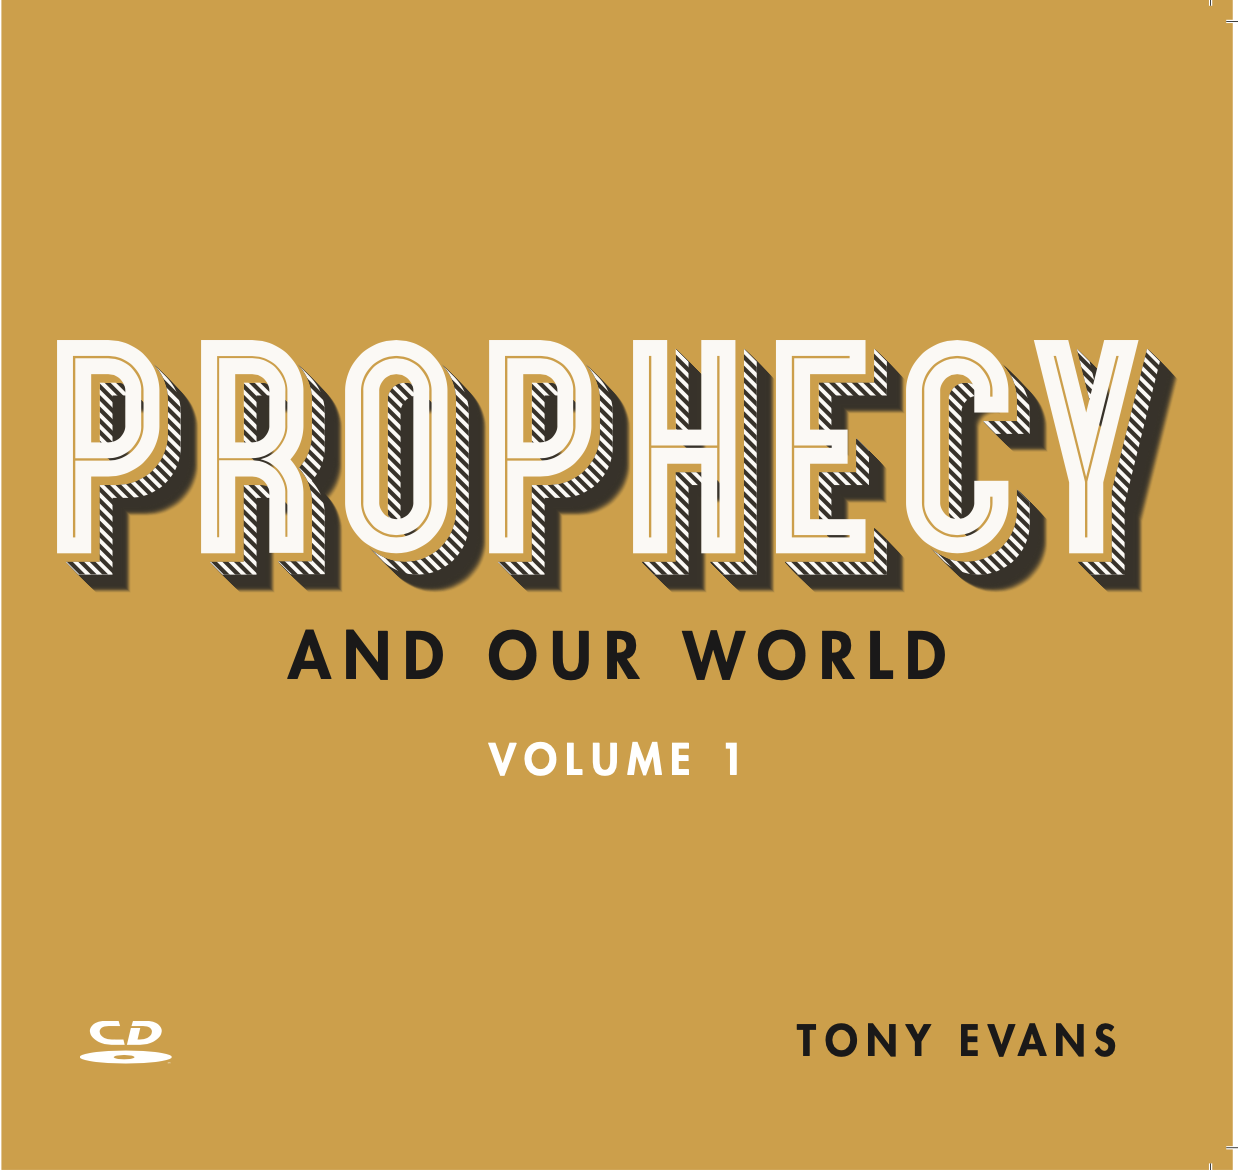 Prophecy and Our World Vol 1 - DVD Series